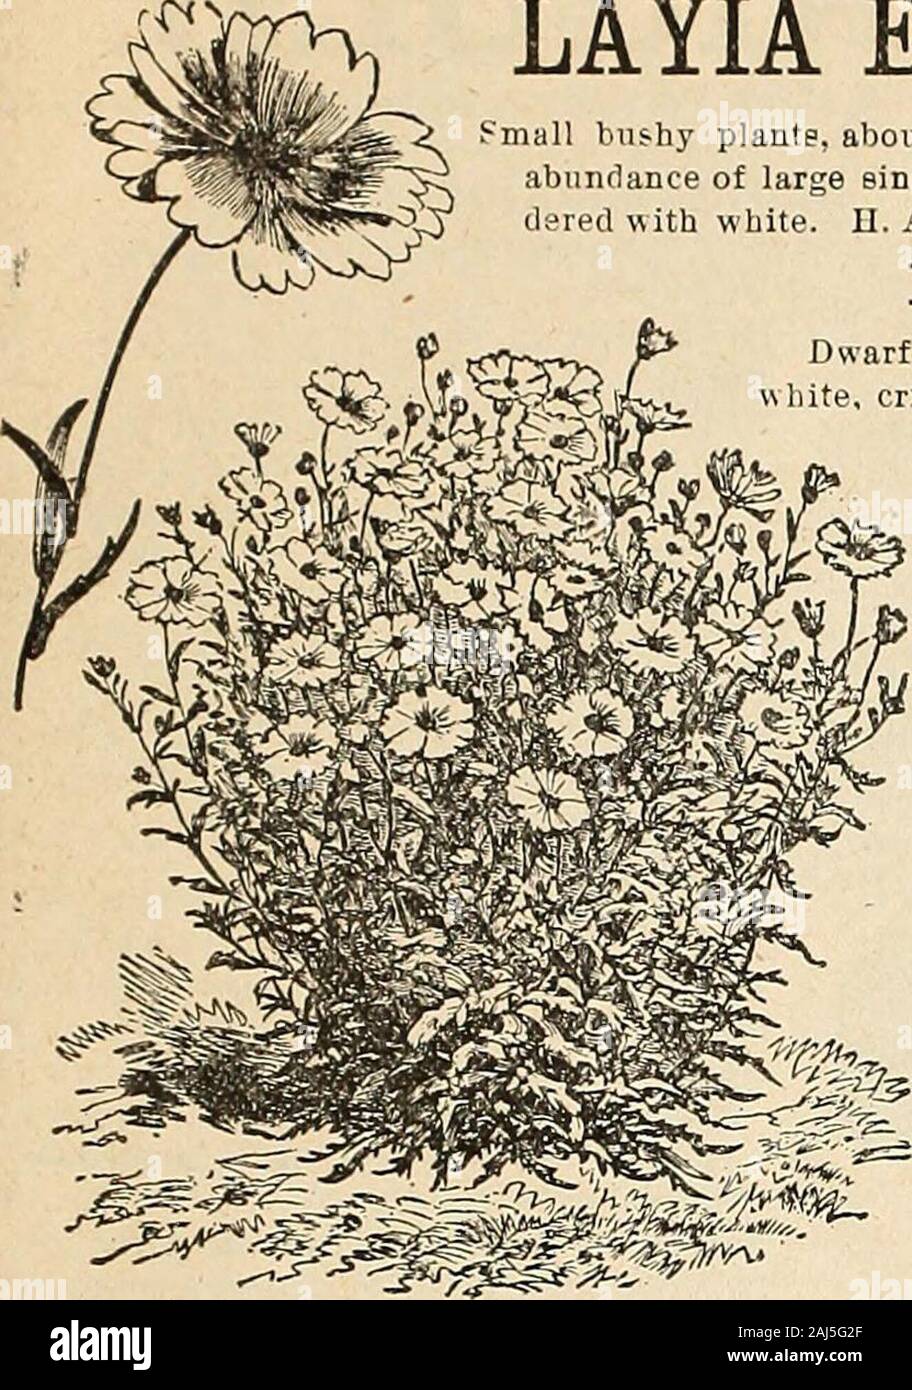 Horitucultural guide : spring 1892 . Qjrri(^ Bros/ |iortieuIturaI Quide.- 53. LAYIA ELEGANS. Small bushy plantp, about 1 foot hiijli, with anabundance of large single yellow flowers bor-tlered with white. B. A 10 LOBELIA. Dwarf-growing plant with bine,white, crimeoD, and rose flowejs,adapted for ribbon bor-ders, and for vases orliangin; baskets. DWARF COM-PACTVARIETIES. For edgings, etc.,growing from 4 to 6inches high.Carters CobaltBlue — Very fine, dwaif, blue 10 Crystal PalaceCo in pact a—Abeautiful new vari-ety, 1/2 foot 5 Gracilis Brecta— Blue, dwarf habit.. 5Prima Donna—Inhabit it is very Stock Photo